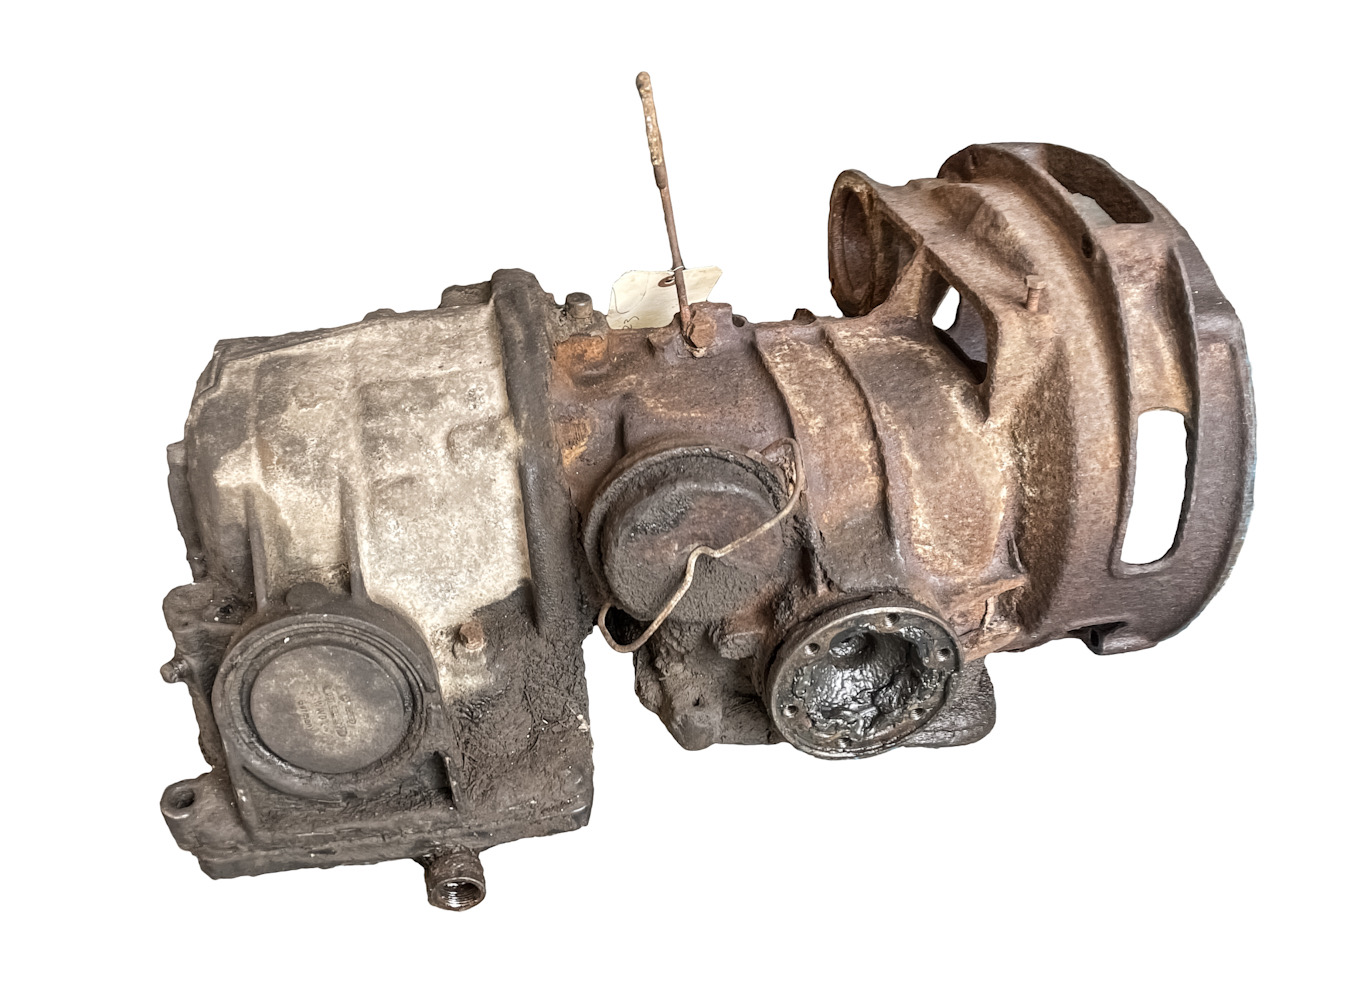 USED OE VW VANAGON FULLY AUTOMATIC WATERBOXER TRANSMISSION 1983-1991